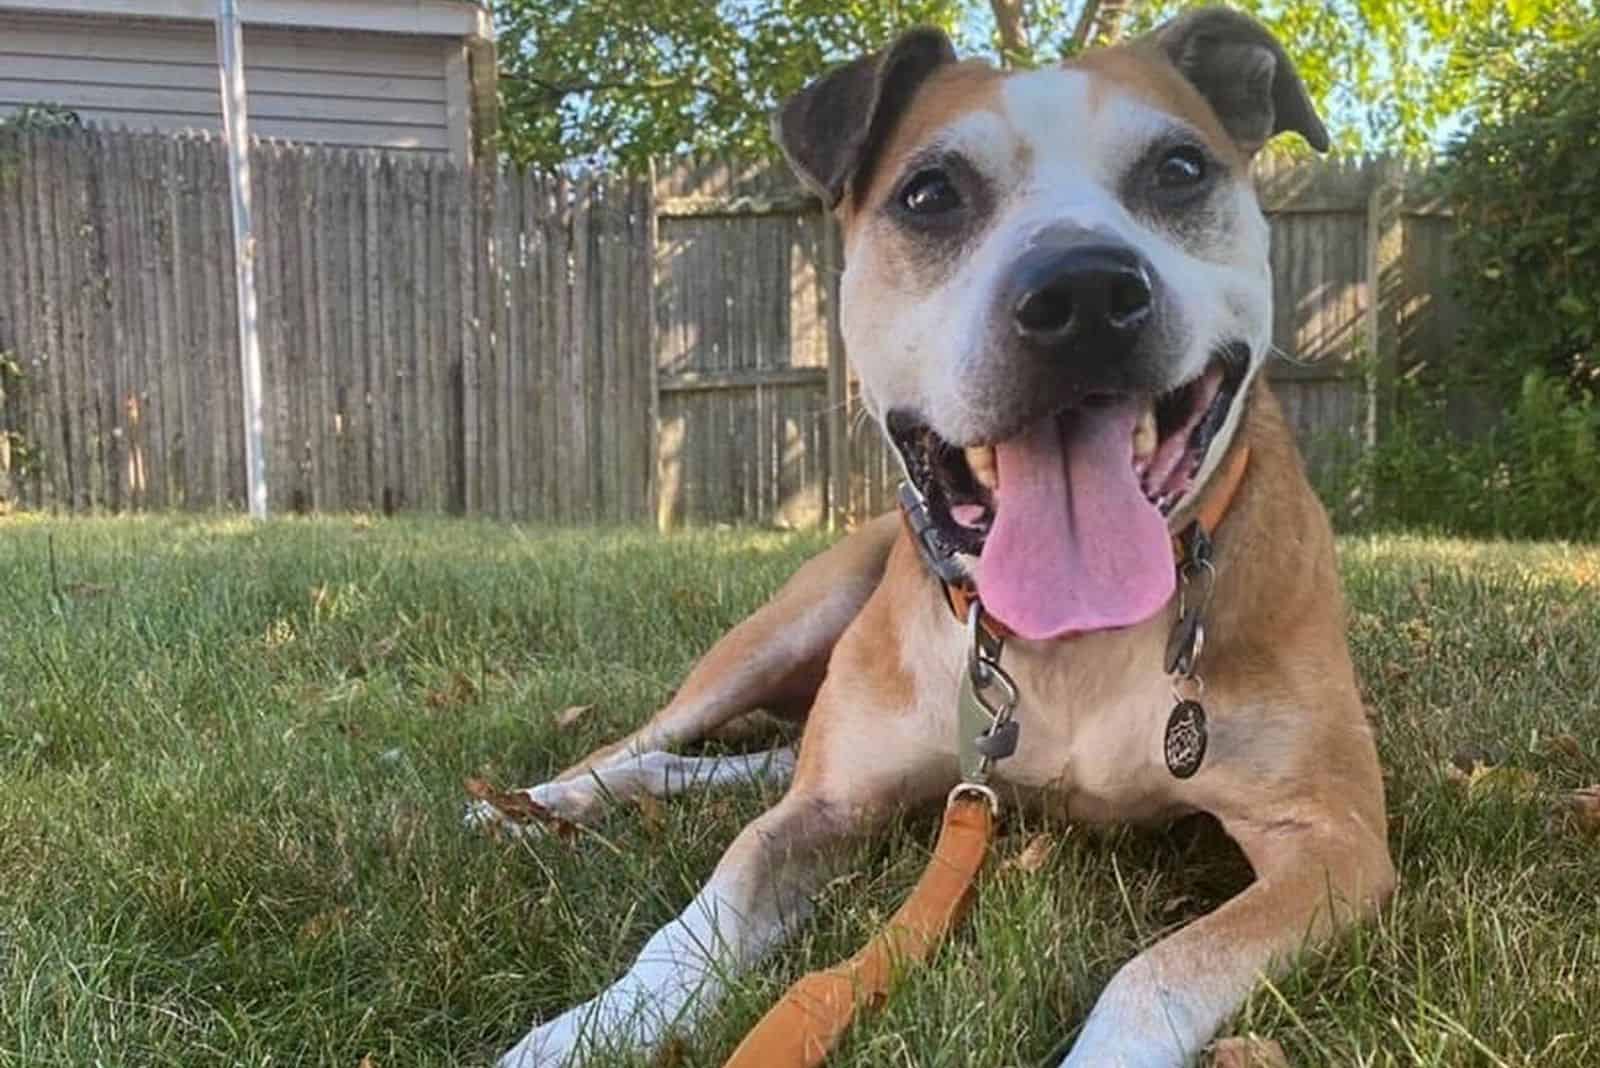 the rescued dog is lying in the garden with its tongue out